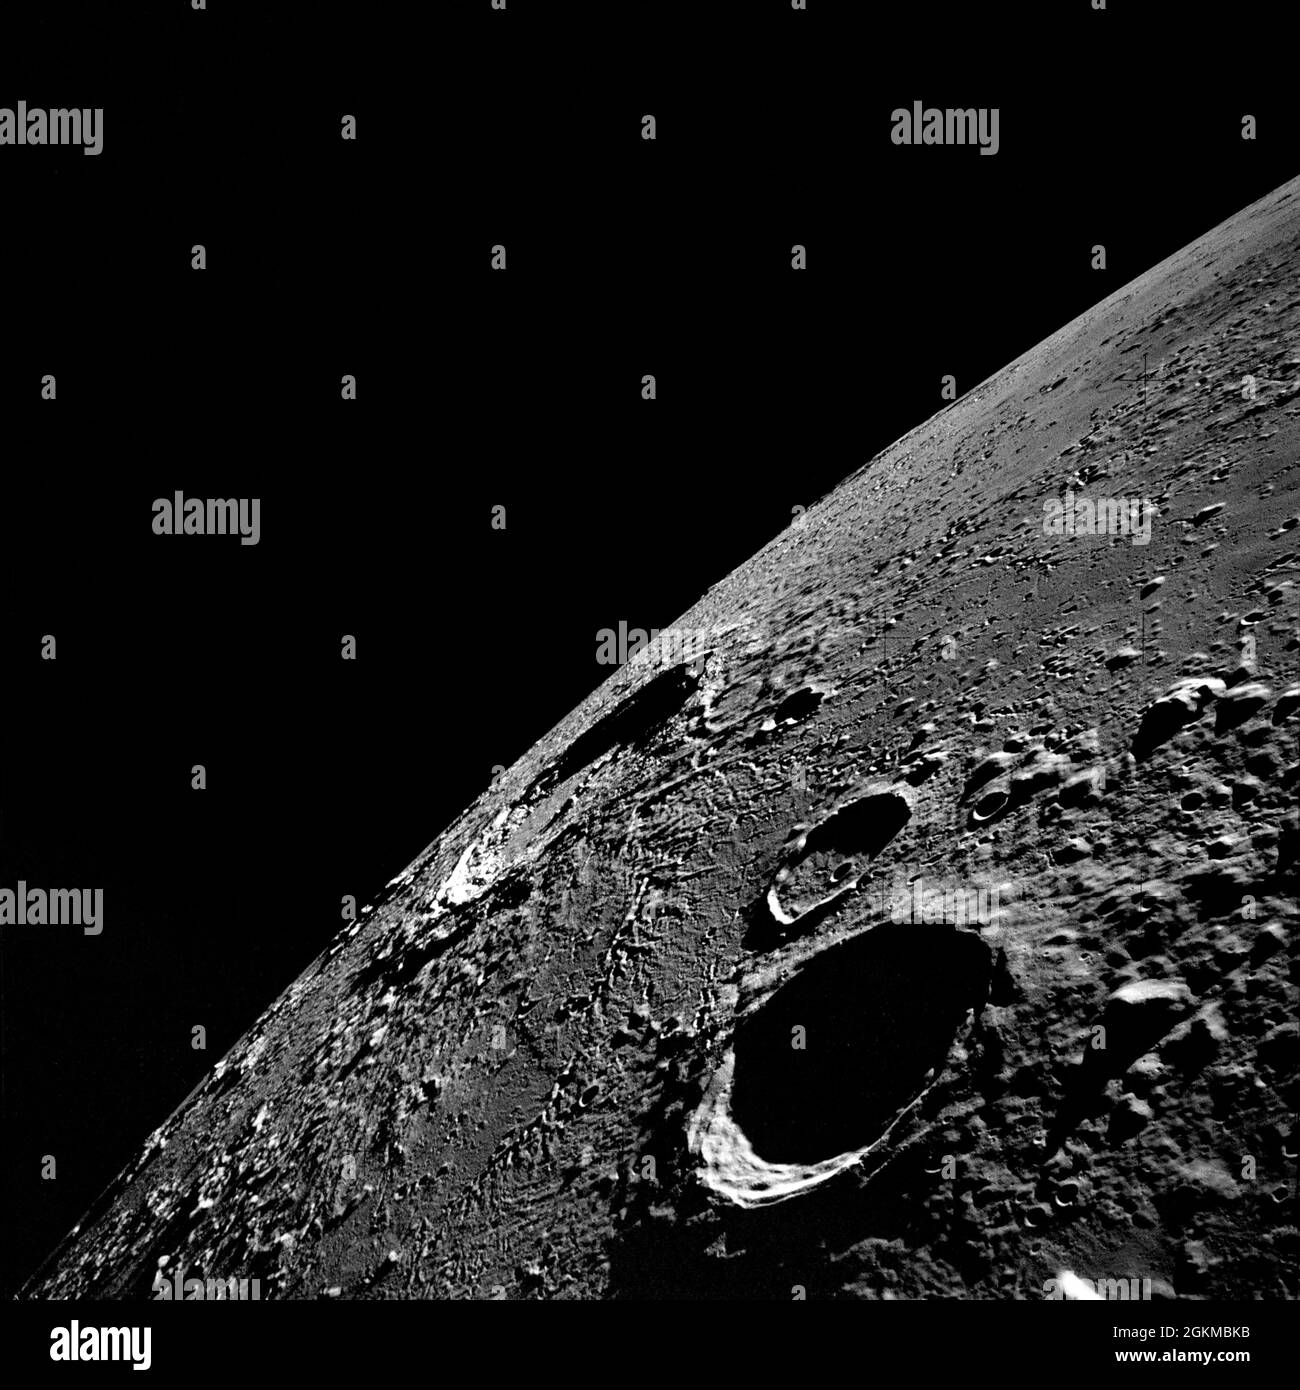 (November 1969) --- An Apollo 12 high-oblique view of the lunar nearside looking northeast toward the crater Copernicus (in center near horizon), as photographed from lunar orbit. The shaded crater in the foreground is Reinhold. Reinhold B is the crater next to Reinhold which as the small crater in the center of it. Also, visible is the keyhole-shaped crater Fauth near the crater Copernicus. Stock Photo